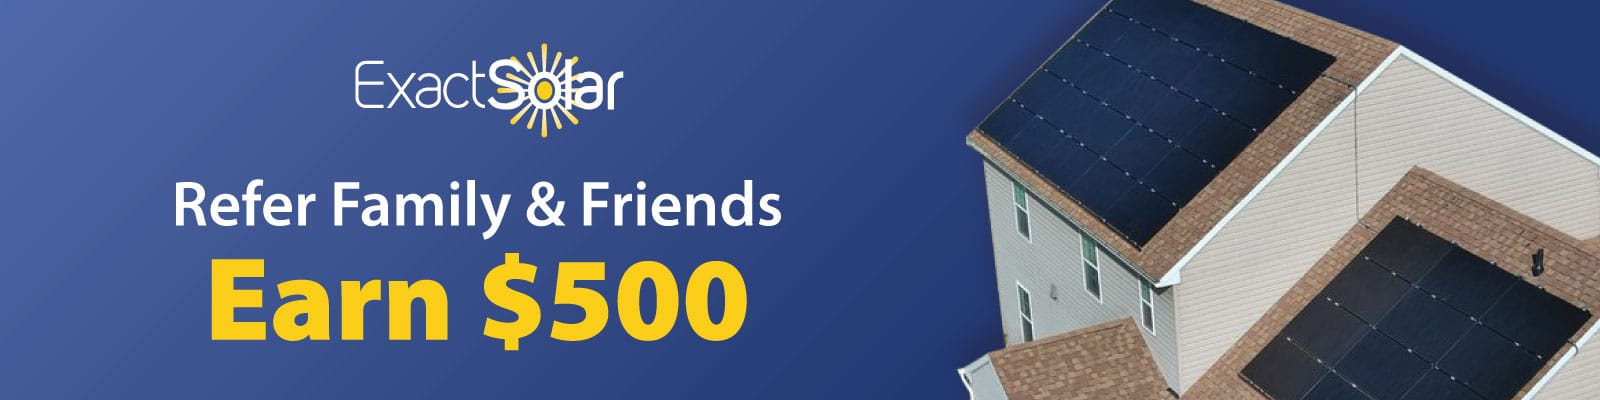 Refer Family and Friends to Exact Solar to Earn $500